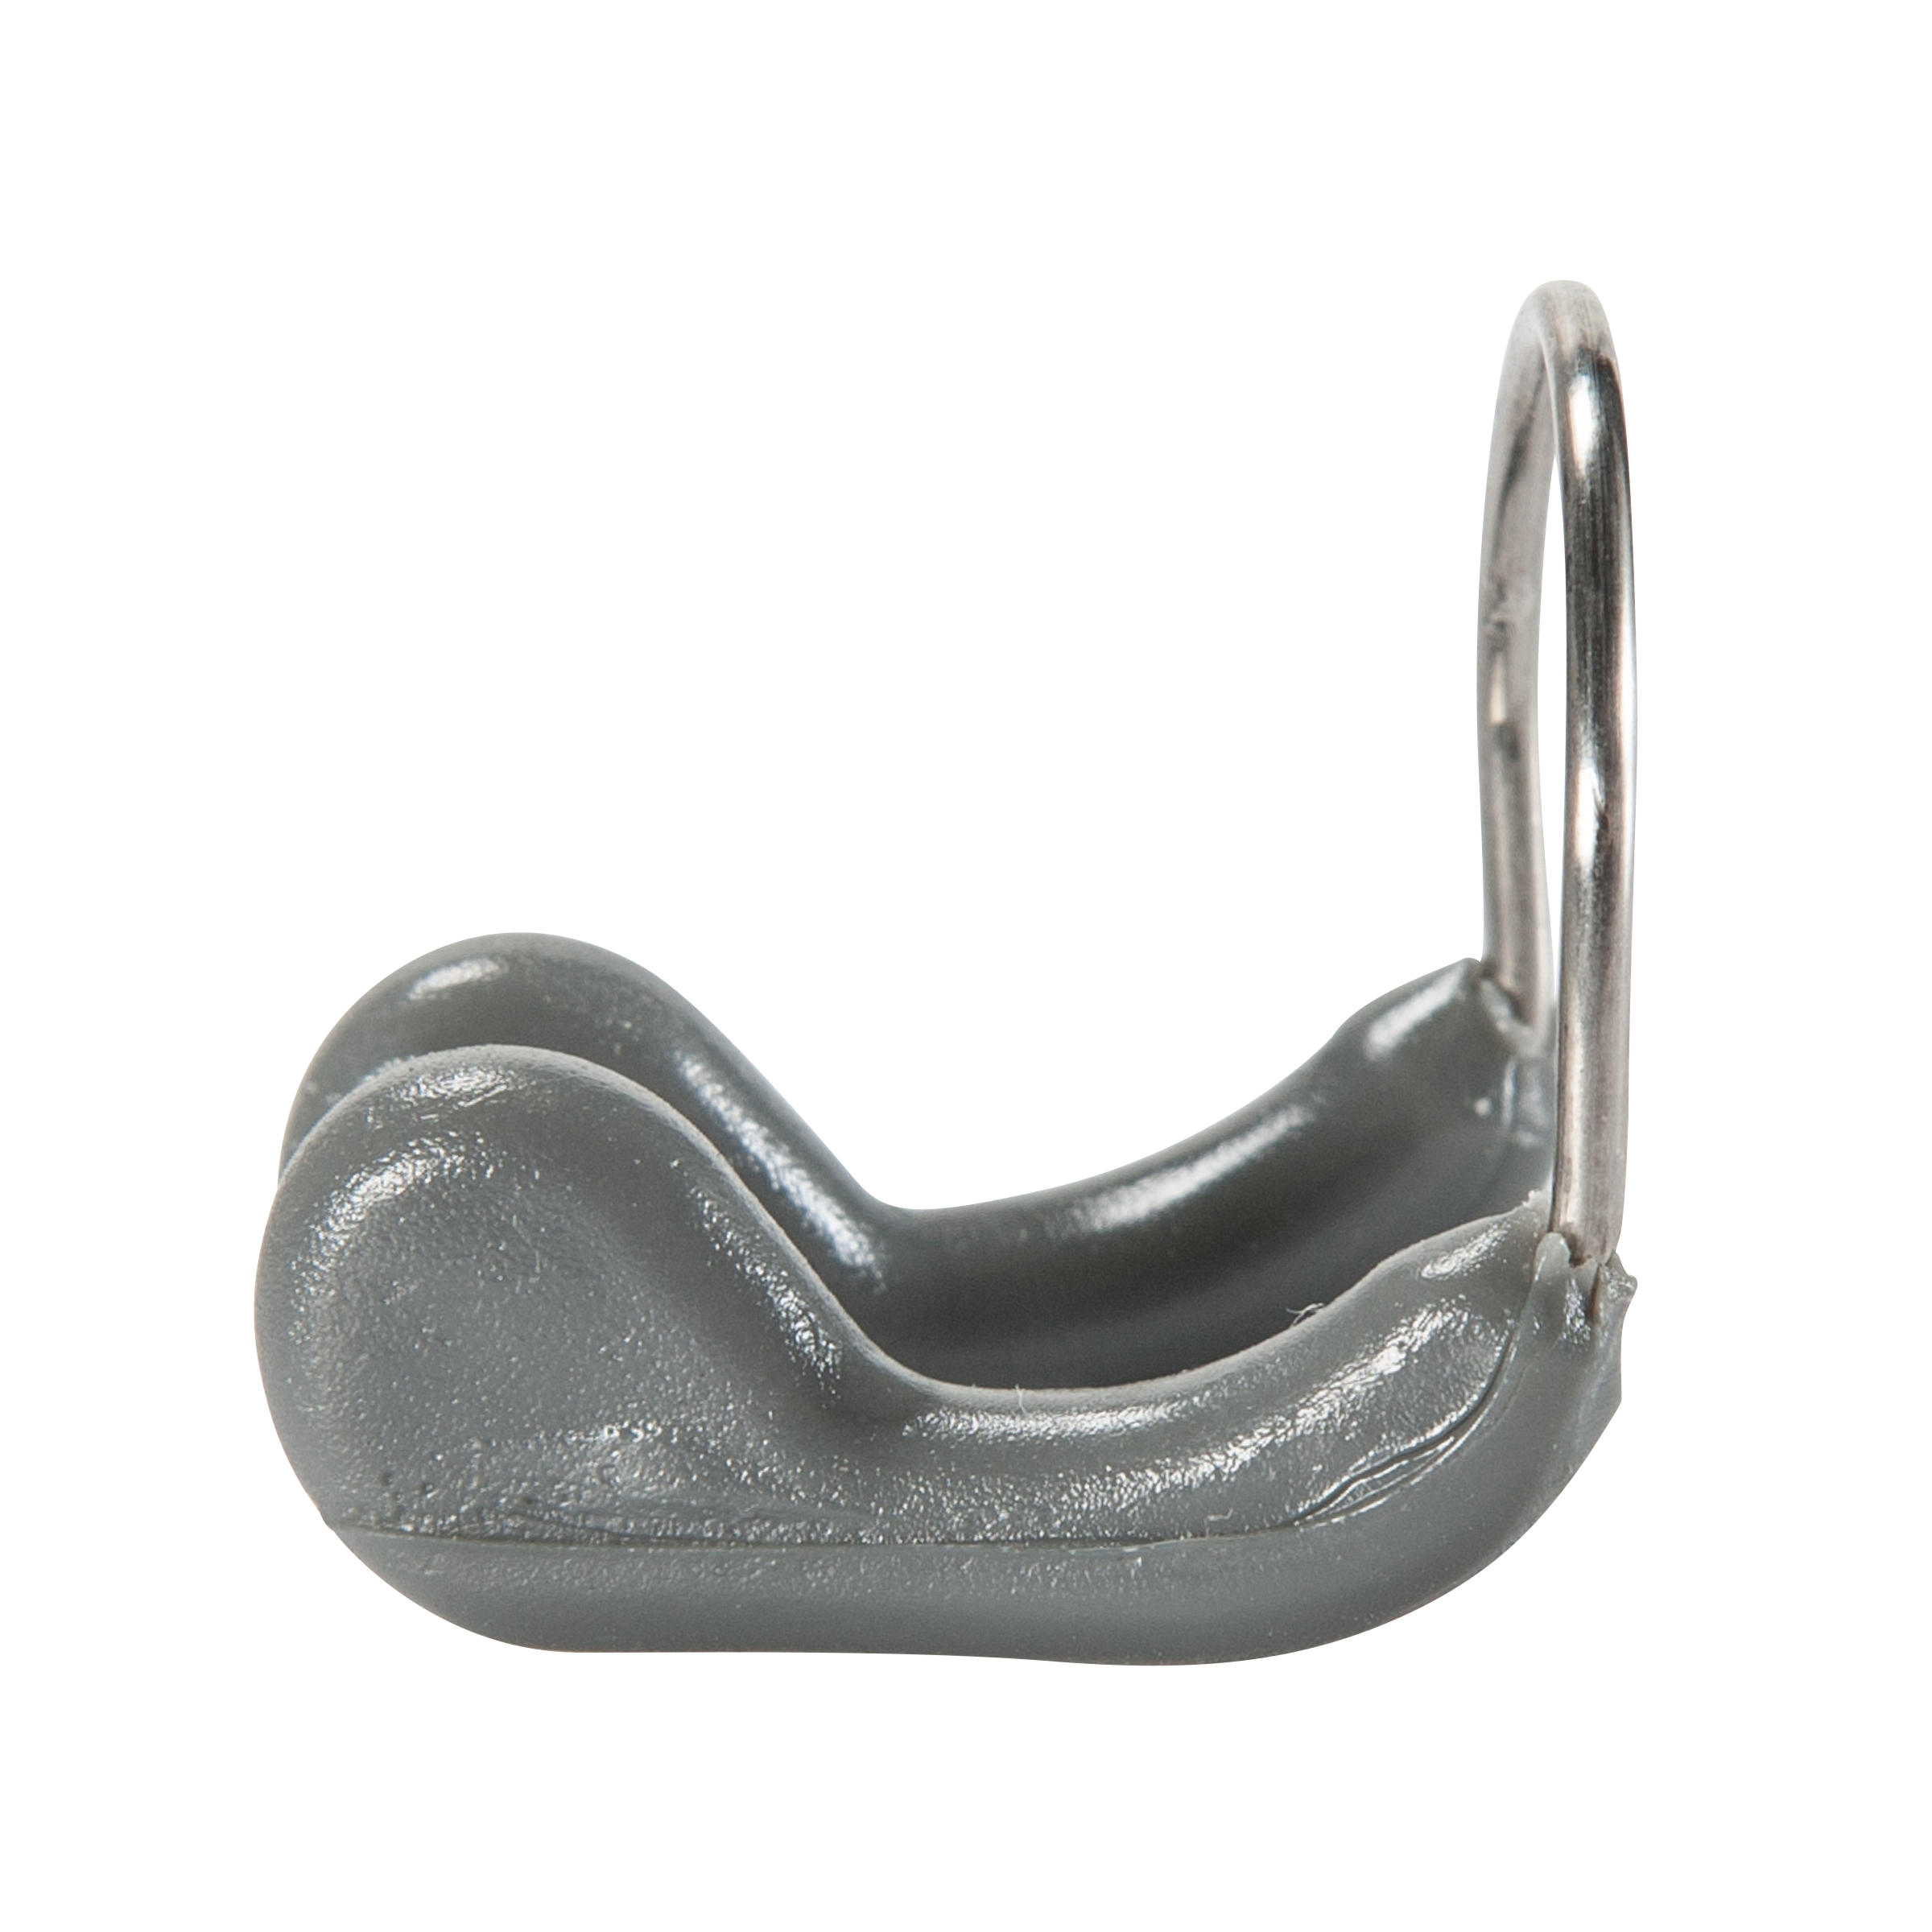 SPEEDO COMPETITION NOSE CLIP - GREY BLUE 5/10